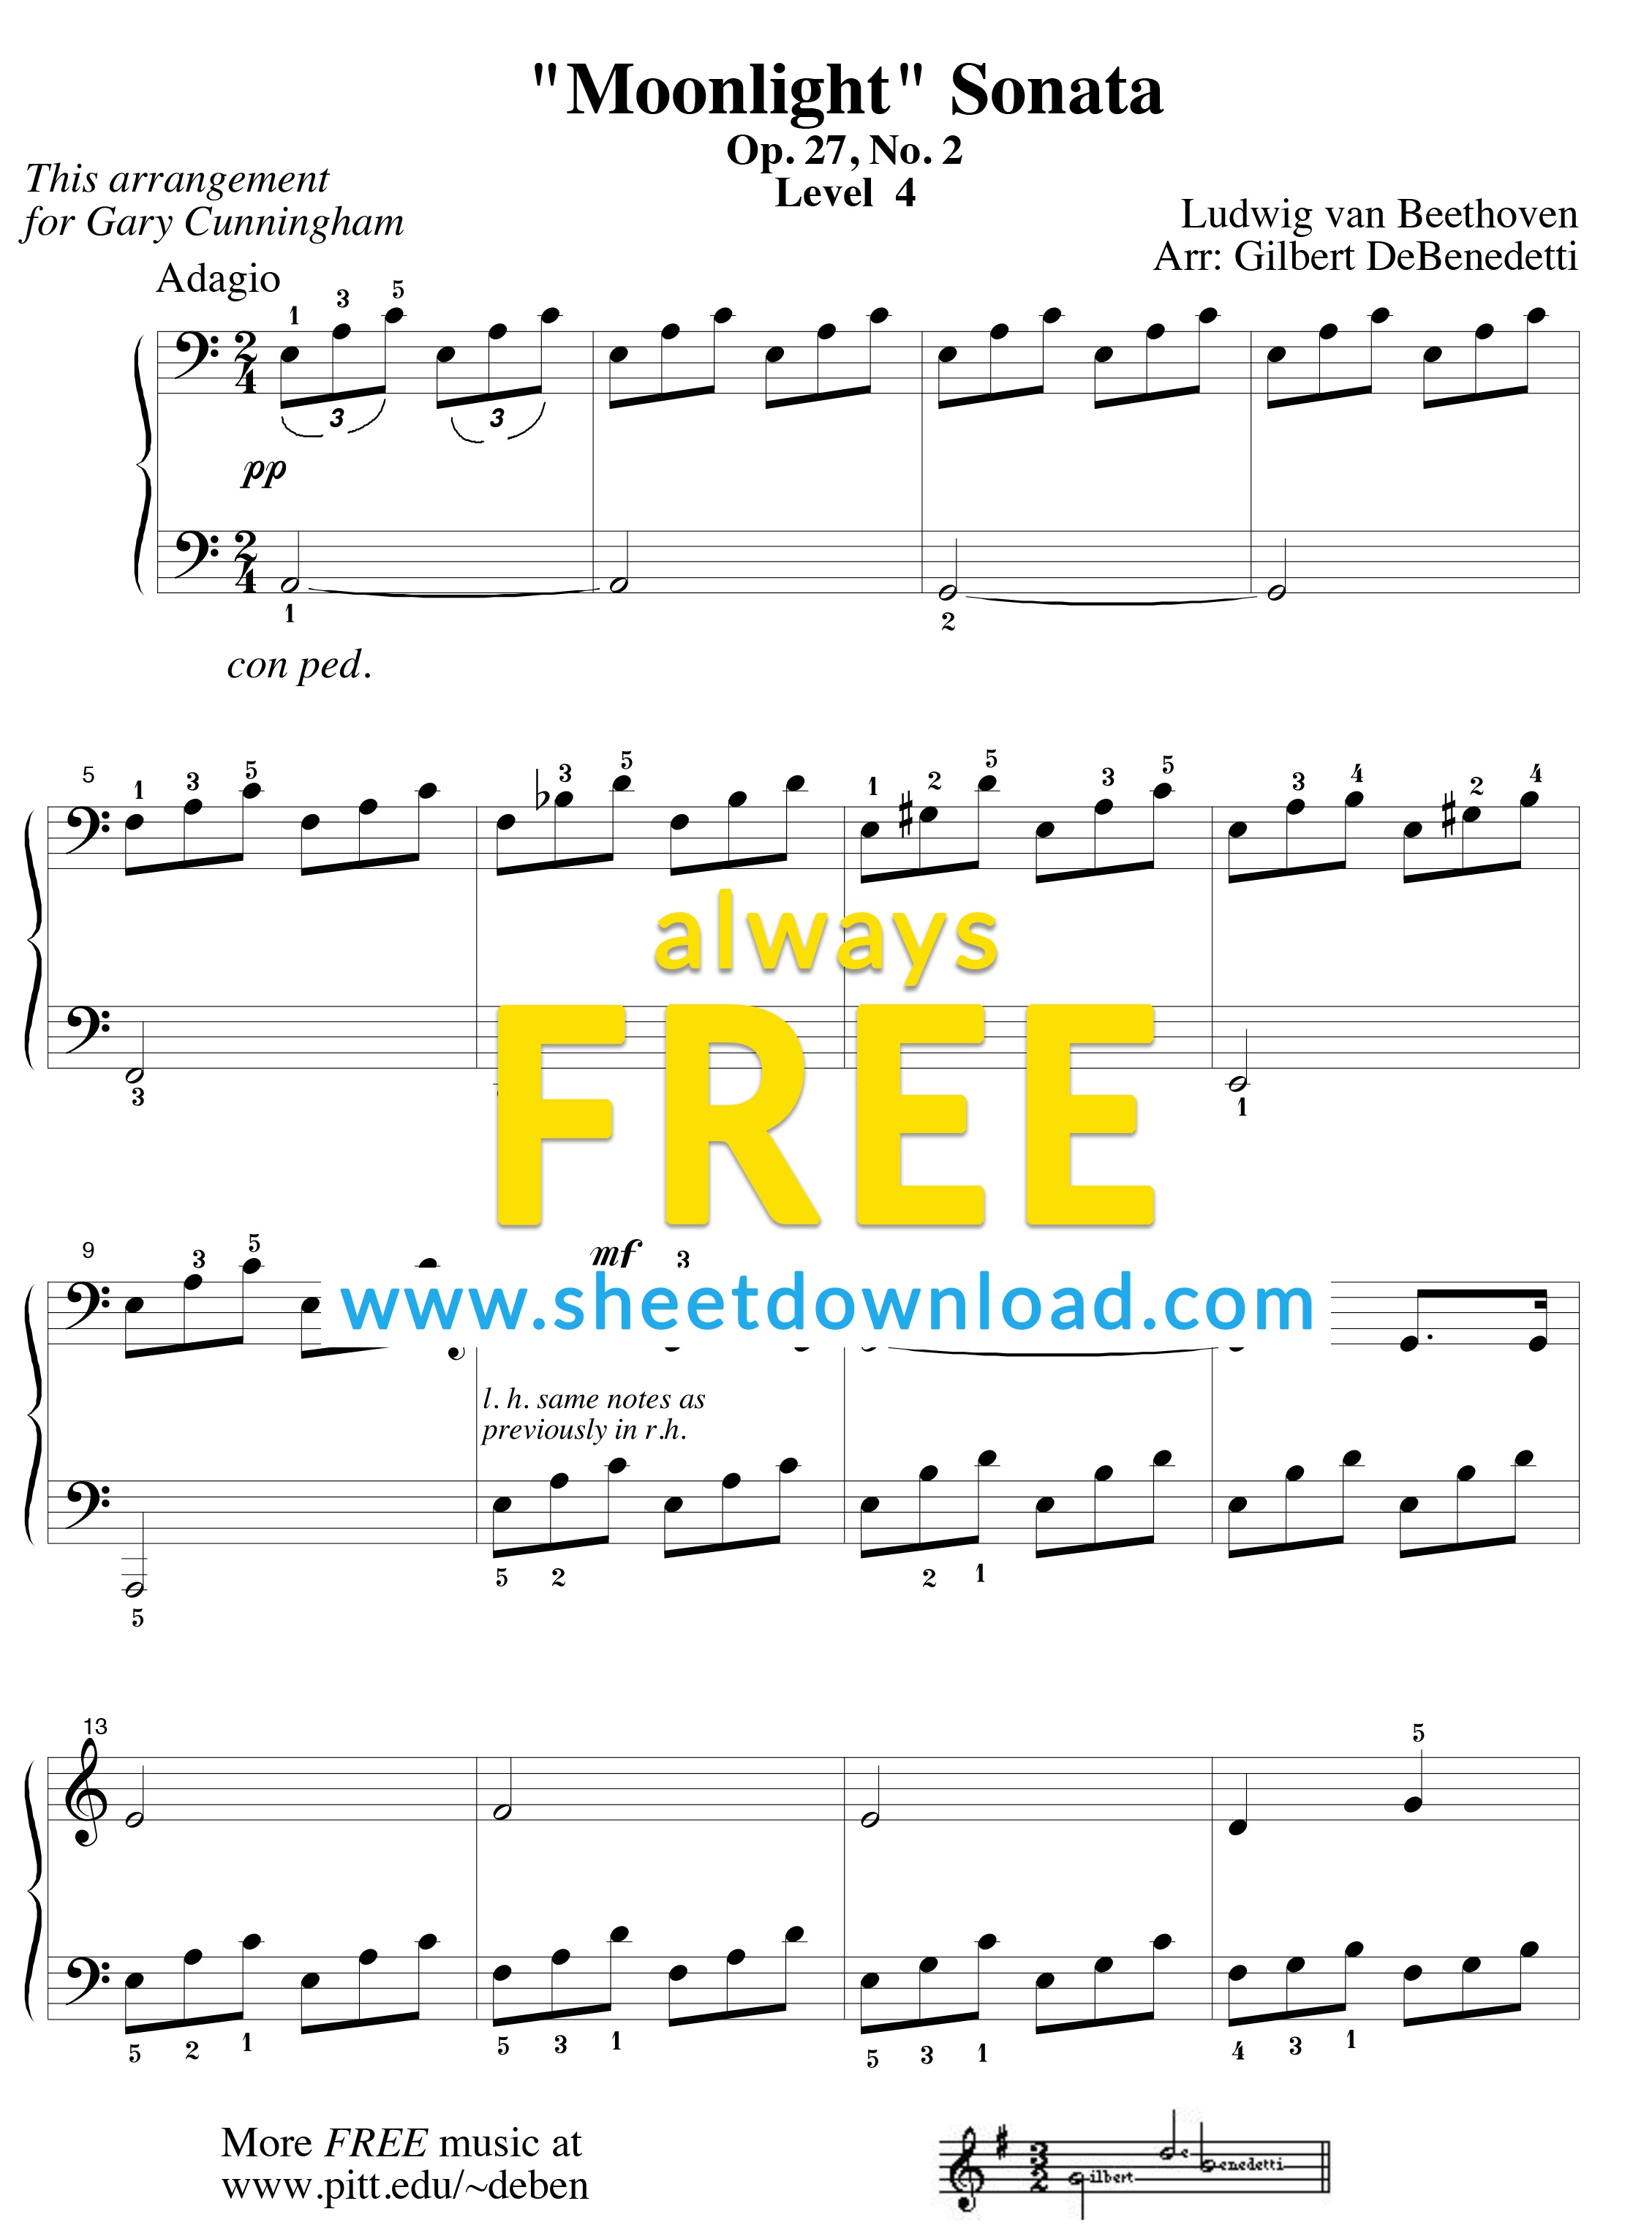 Top 100 Popular Piano Sheets Downloaded From Sheetdownload - Free Printable Sheet Music For Piano Beginners Popular Songs